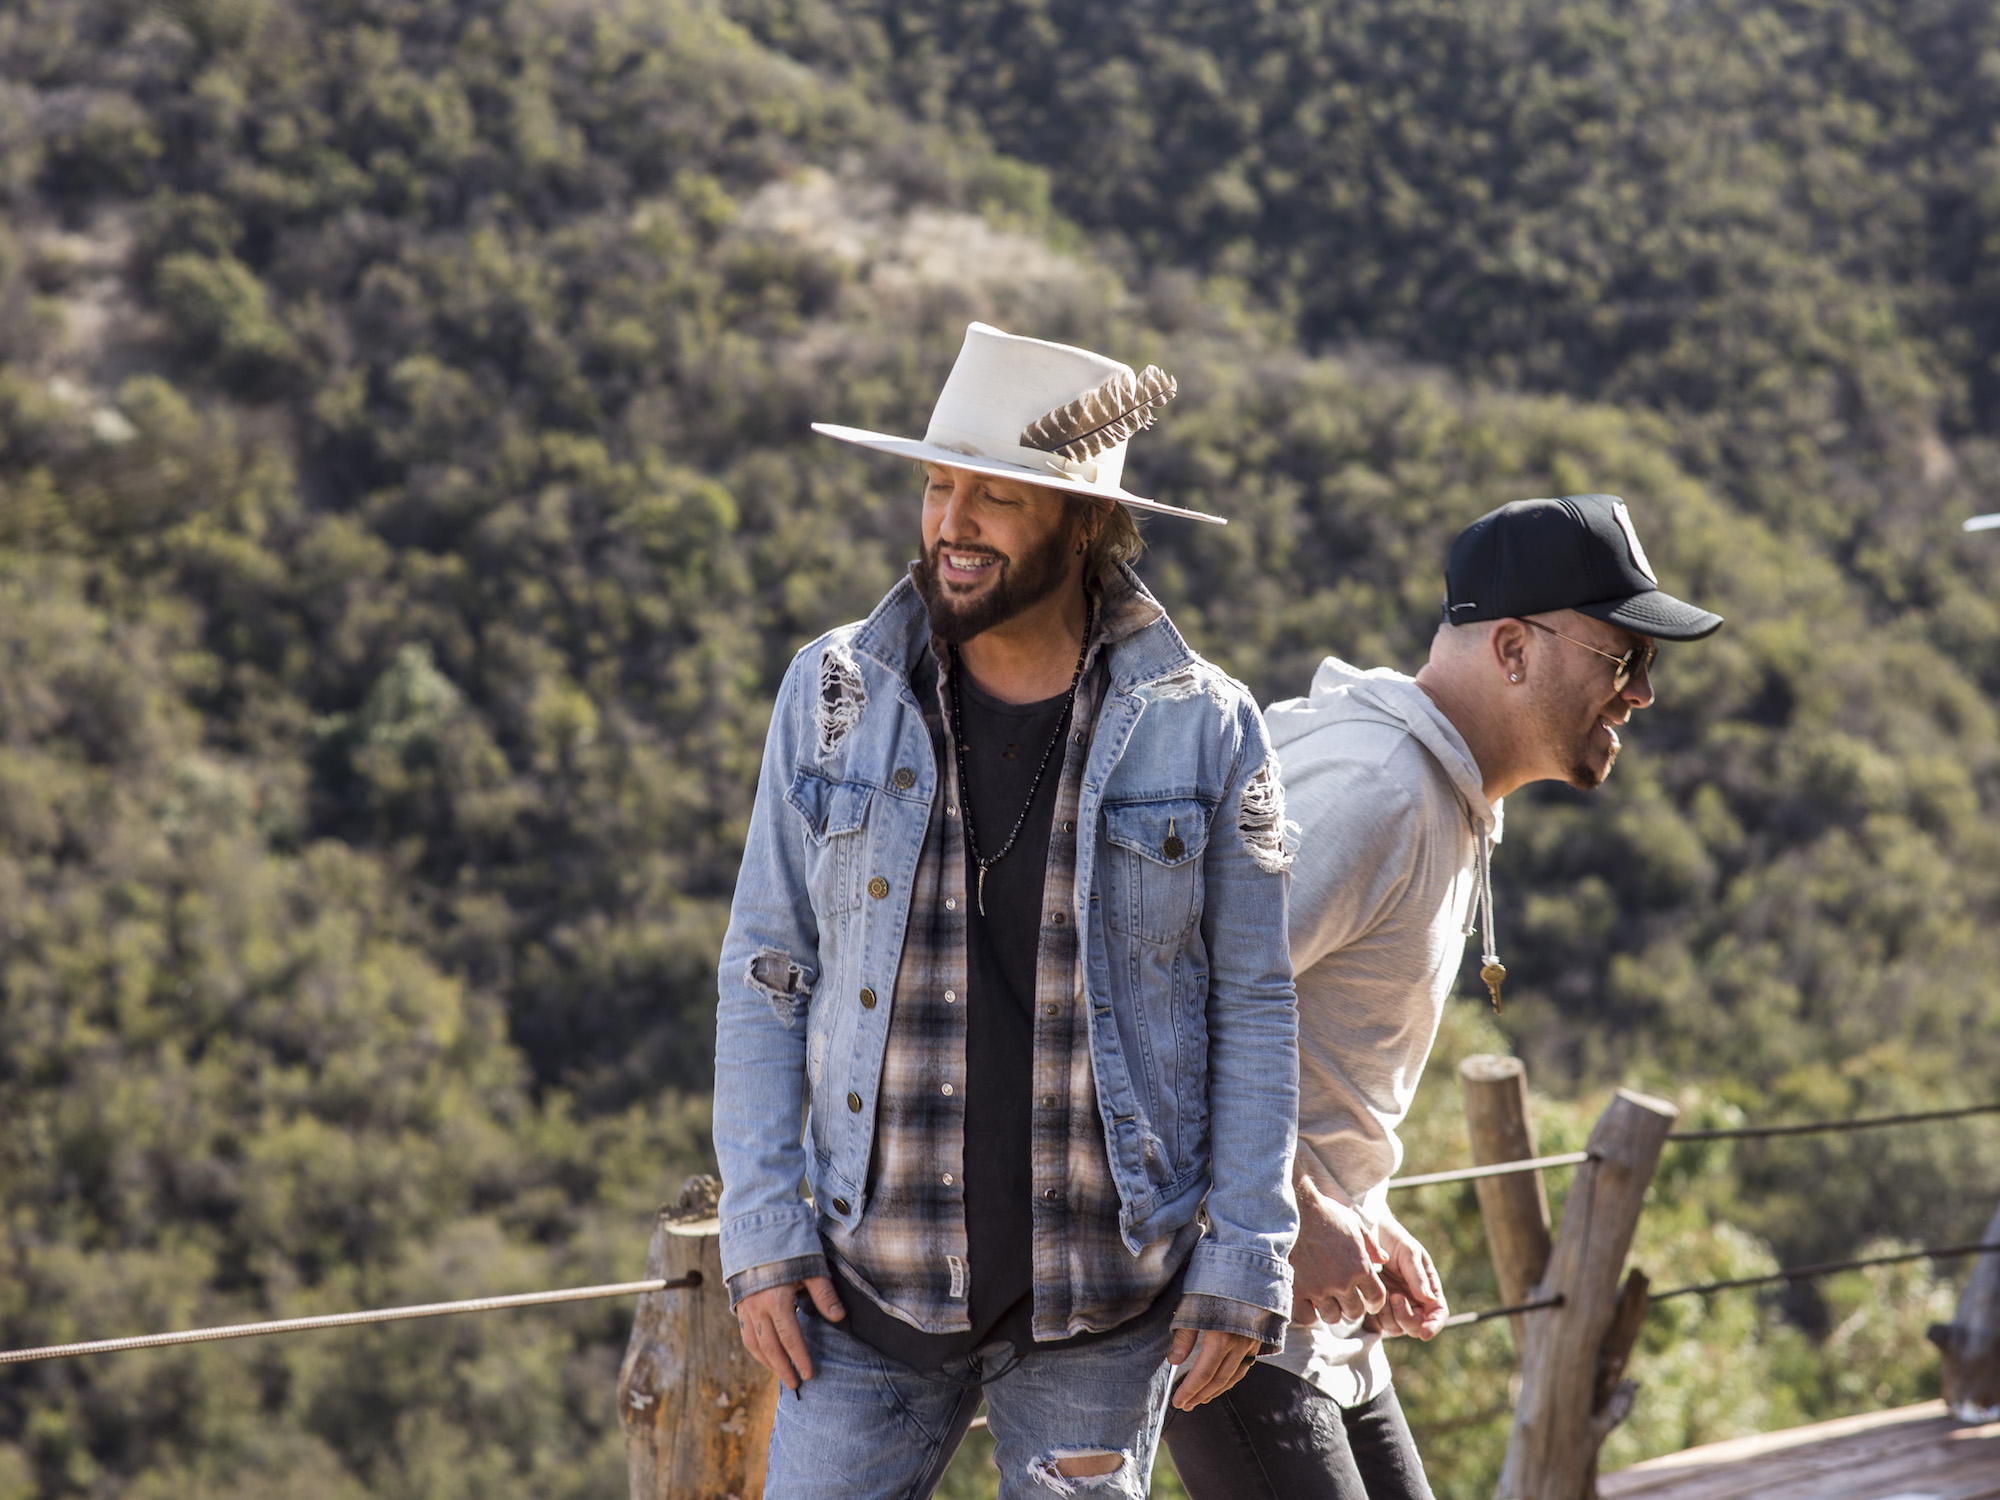 LOCASH Unveils Music Video for “Don’t Get Better Than That” – Watch Now